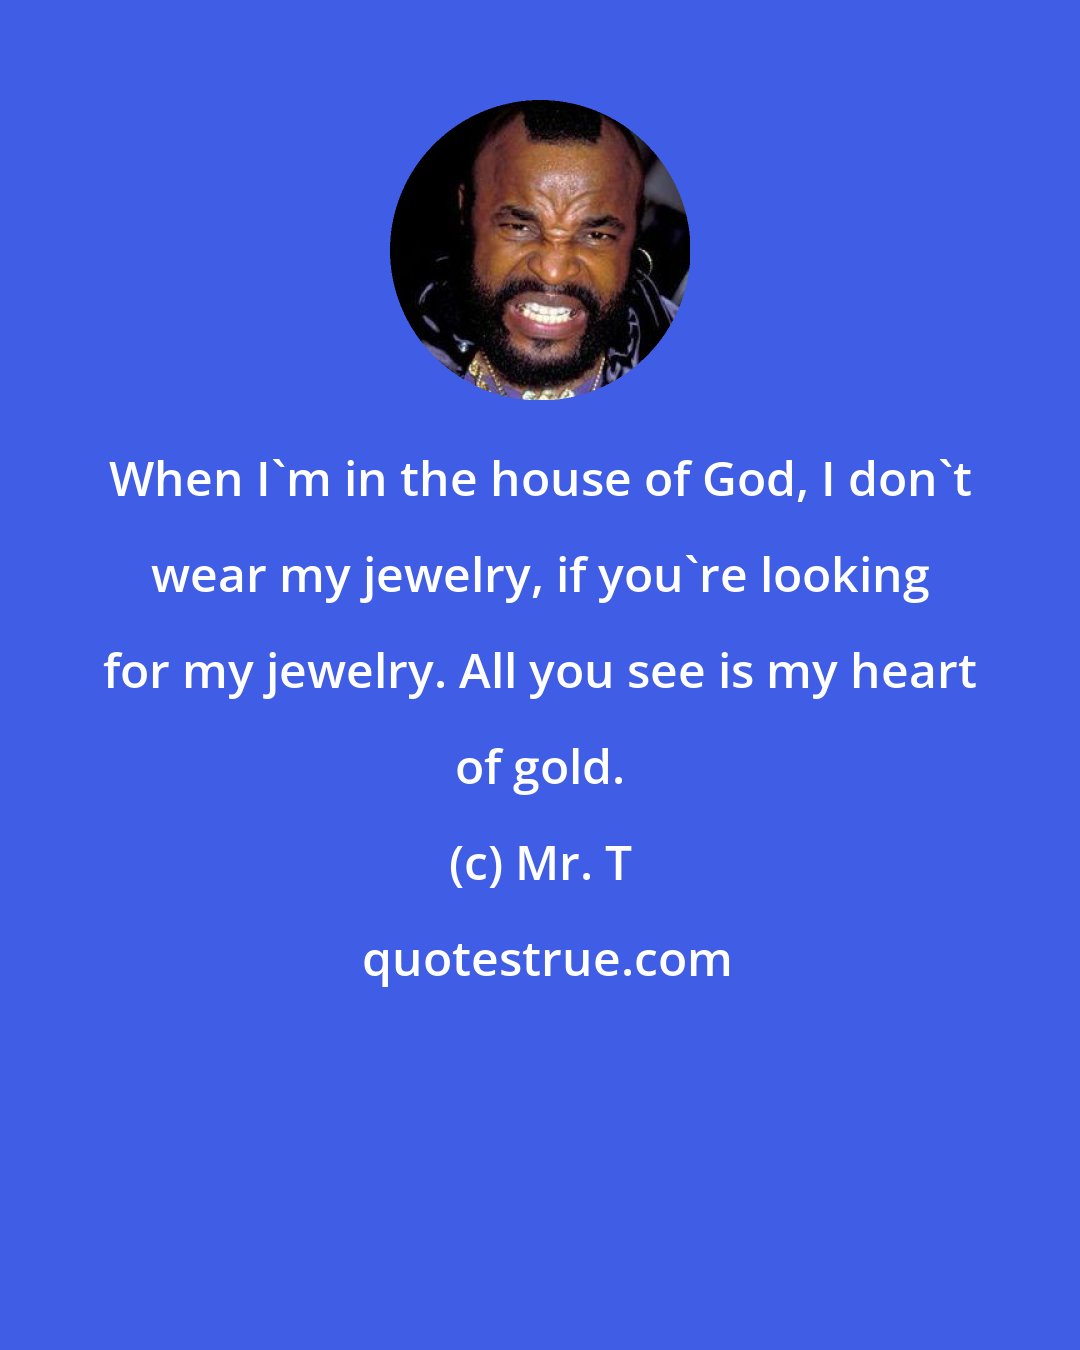 Mr. T: When I'm in the house of God, I don't wear my jewelry, if you're looking for my jewelry. All you see is my heart of gold.